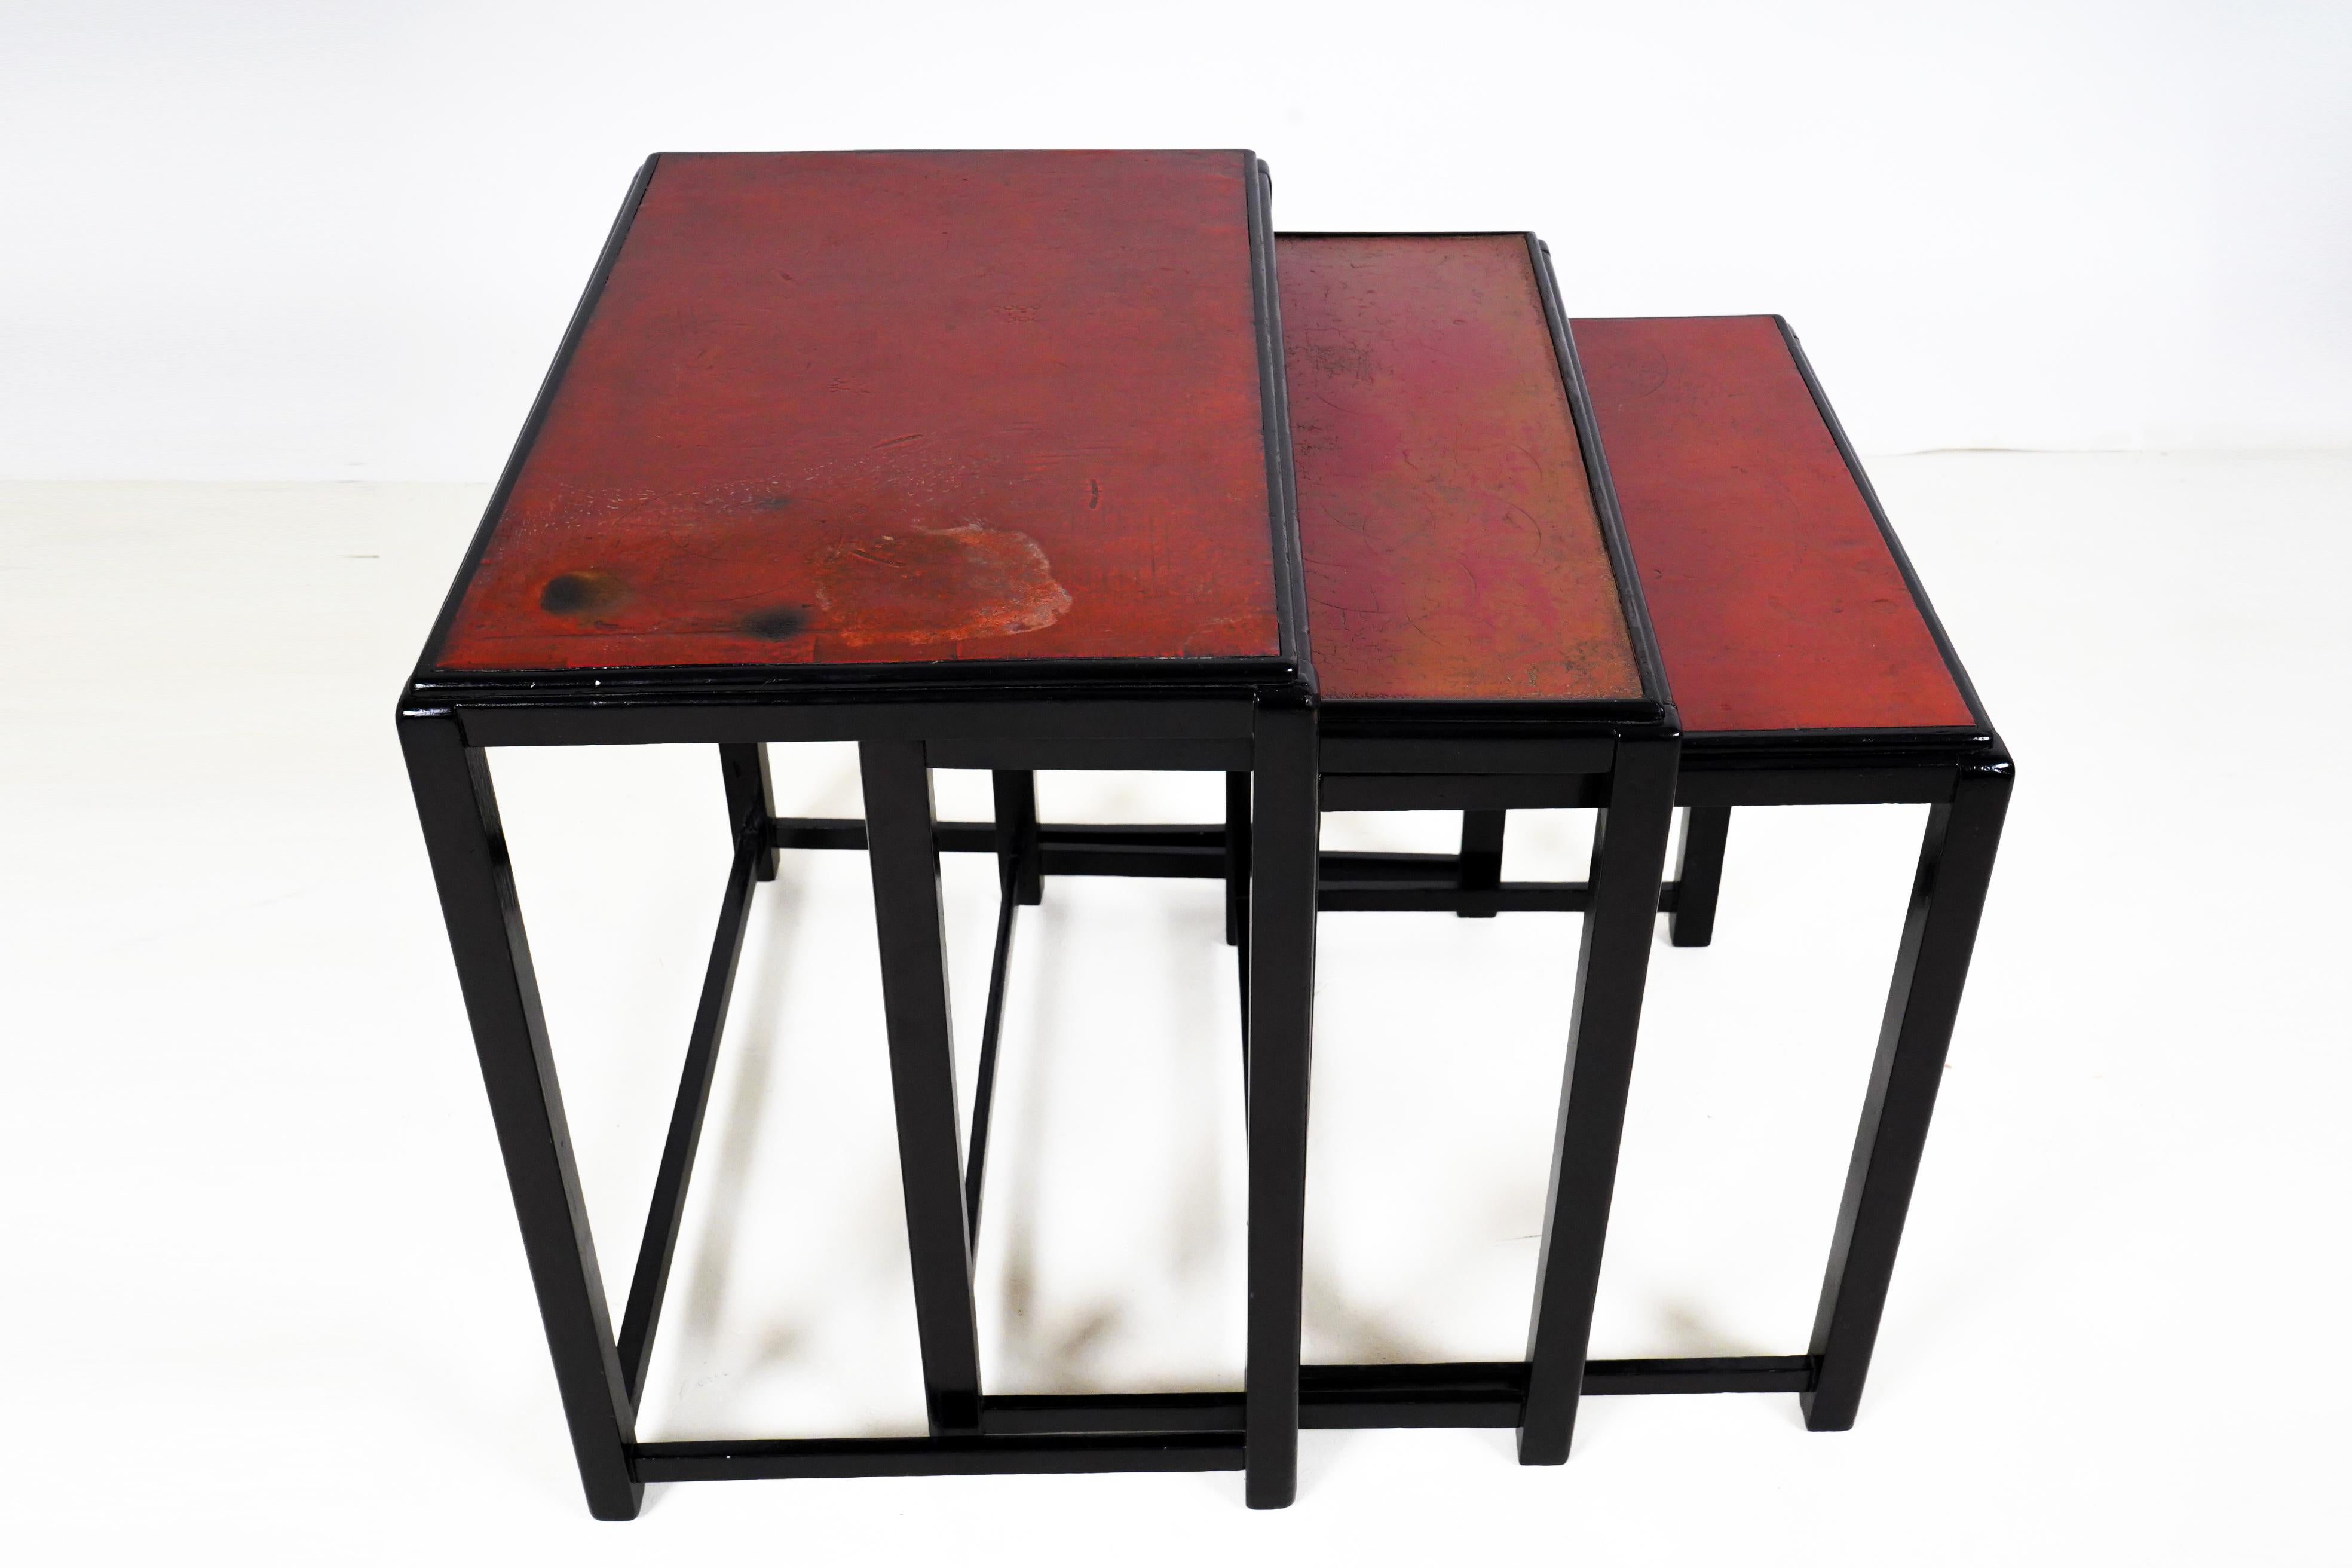 A set of three Bauhaus-inspired Hungarian Art Deco side tables. These tables are as beautiful as they are practical. The solid walnut frames have been French-polished dark, almost black. Their tops are red lacquer and have been gently re-glossed,